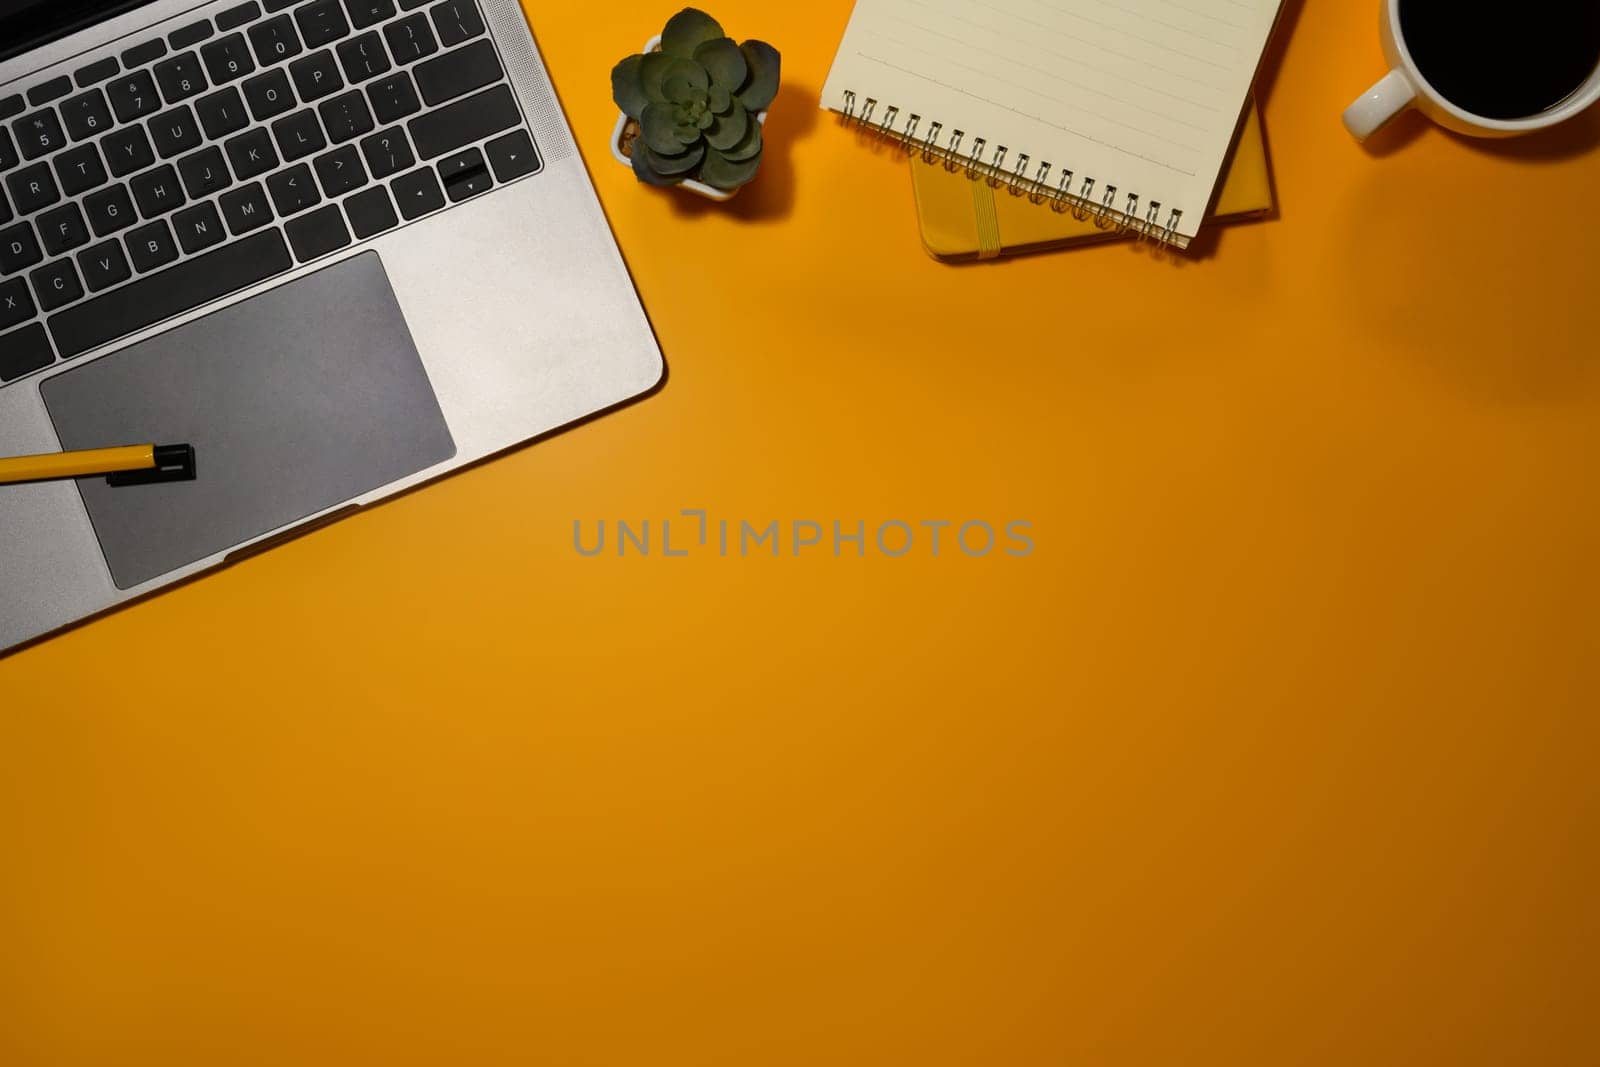 Top view laptop, cup of coffee, notepad and small potted plant on yellow background with copy space.